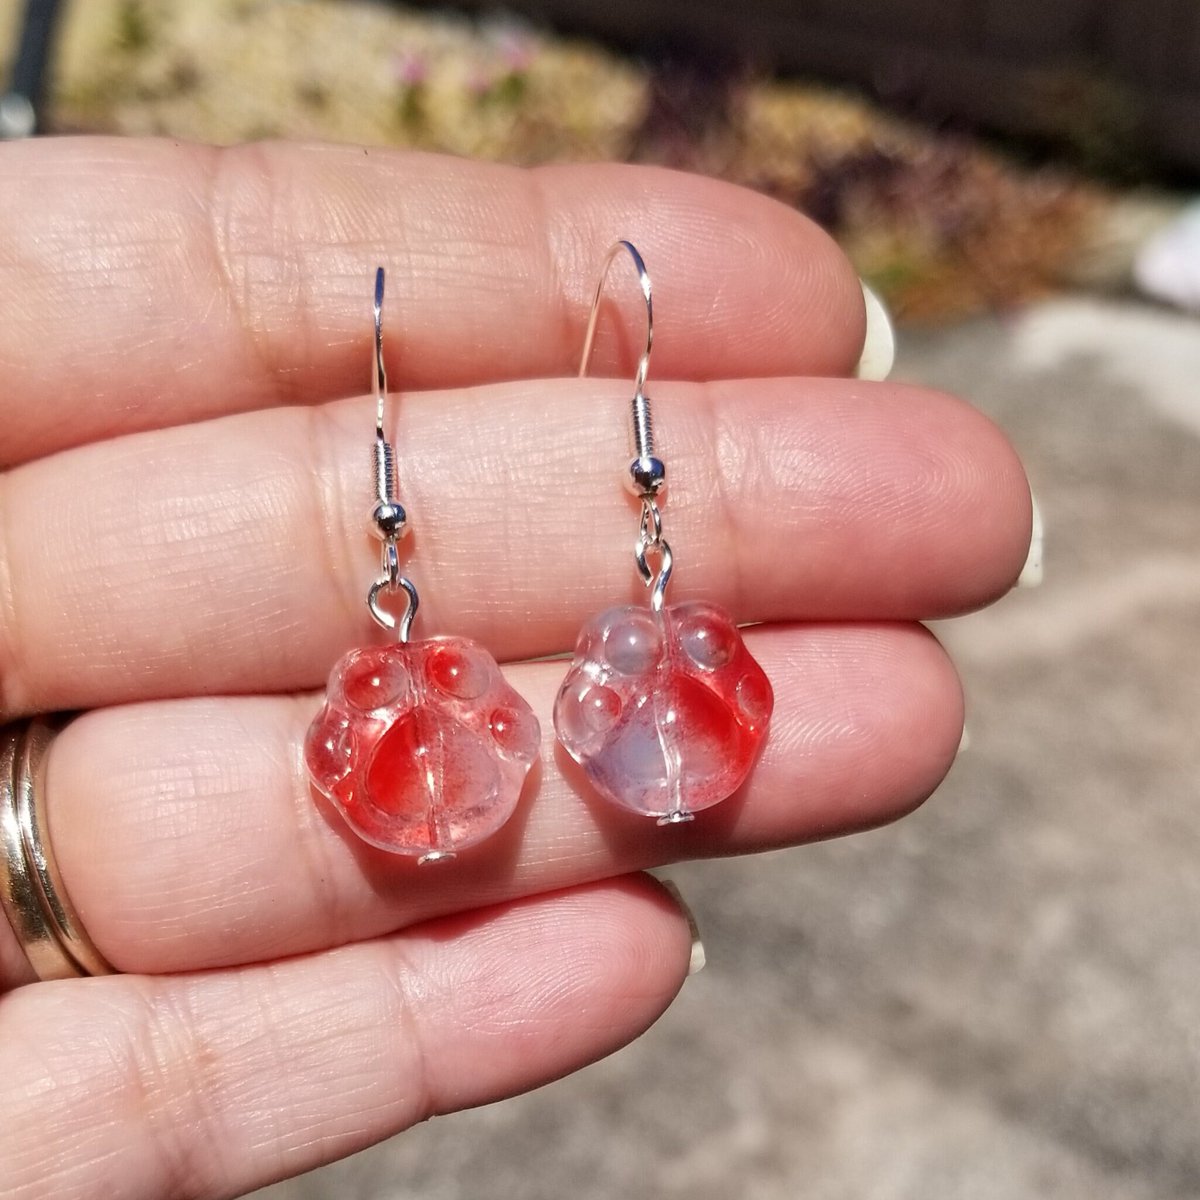 Glass Paw Print Earrings, Paw Earrings, Cat Paw Earrings #jewelry #earrings #paw #pawprint #pawprints #toebeans #catpaw #catpaws #cat #cats #catslover #handmadejewelry #giftsforher #Mothersday #Mothersdaygifts #Etsy etsy.me/49vYTyZ via @Etsy